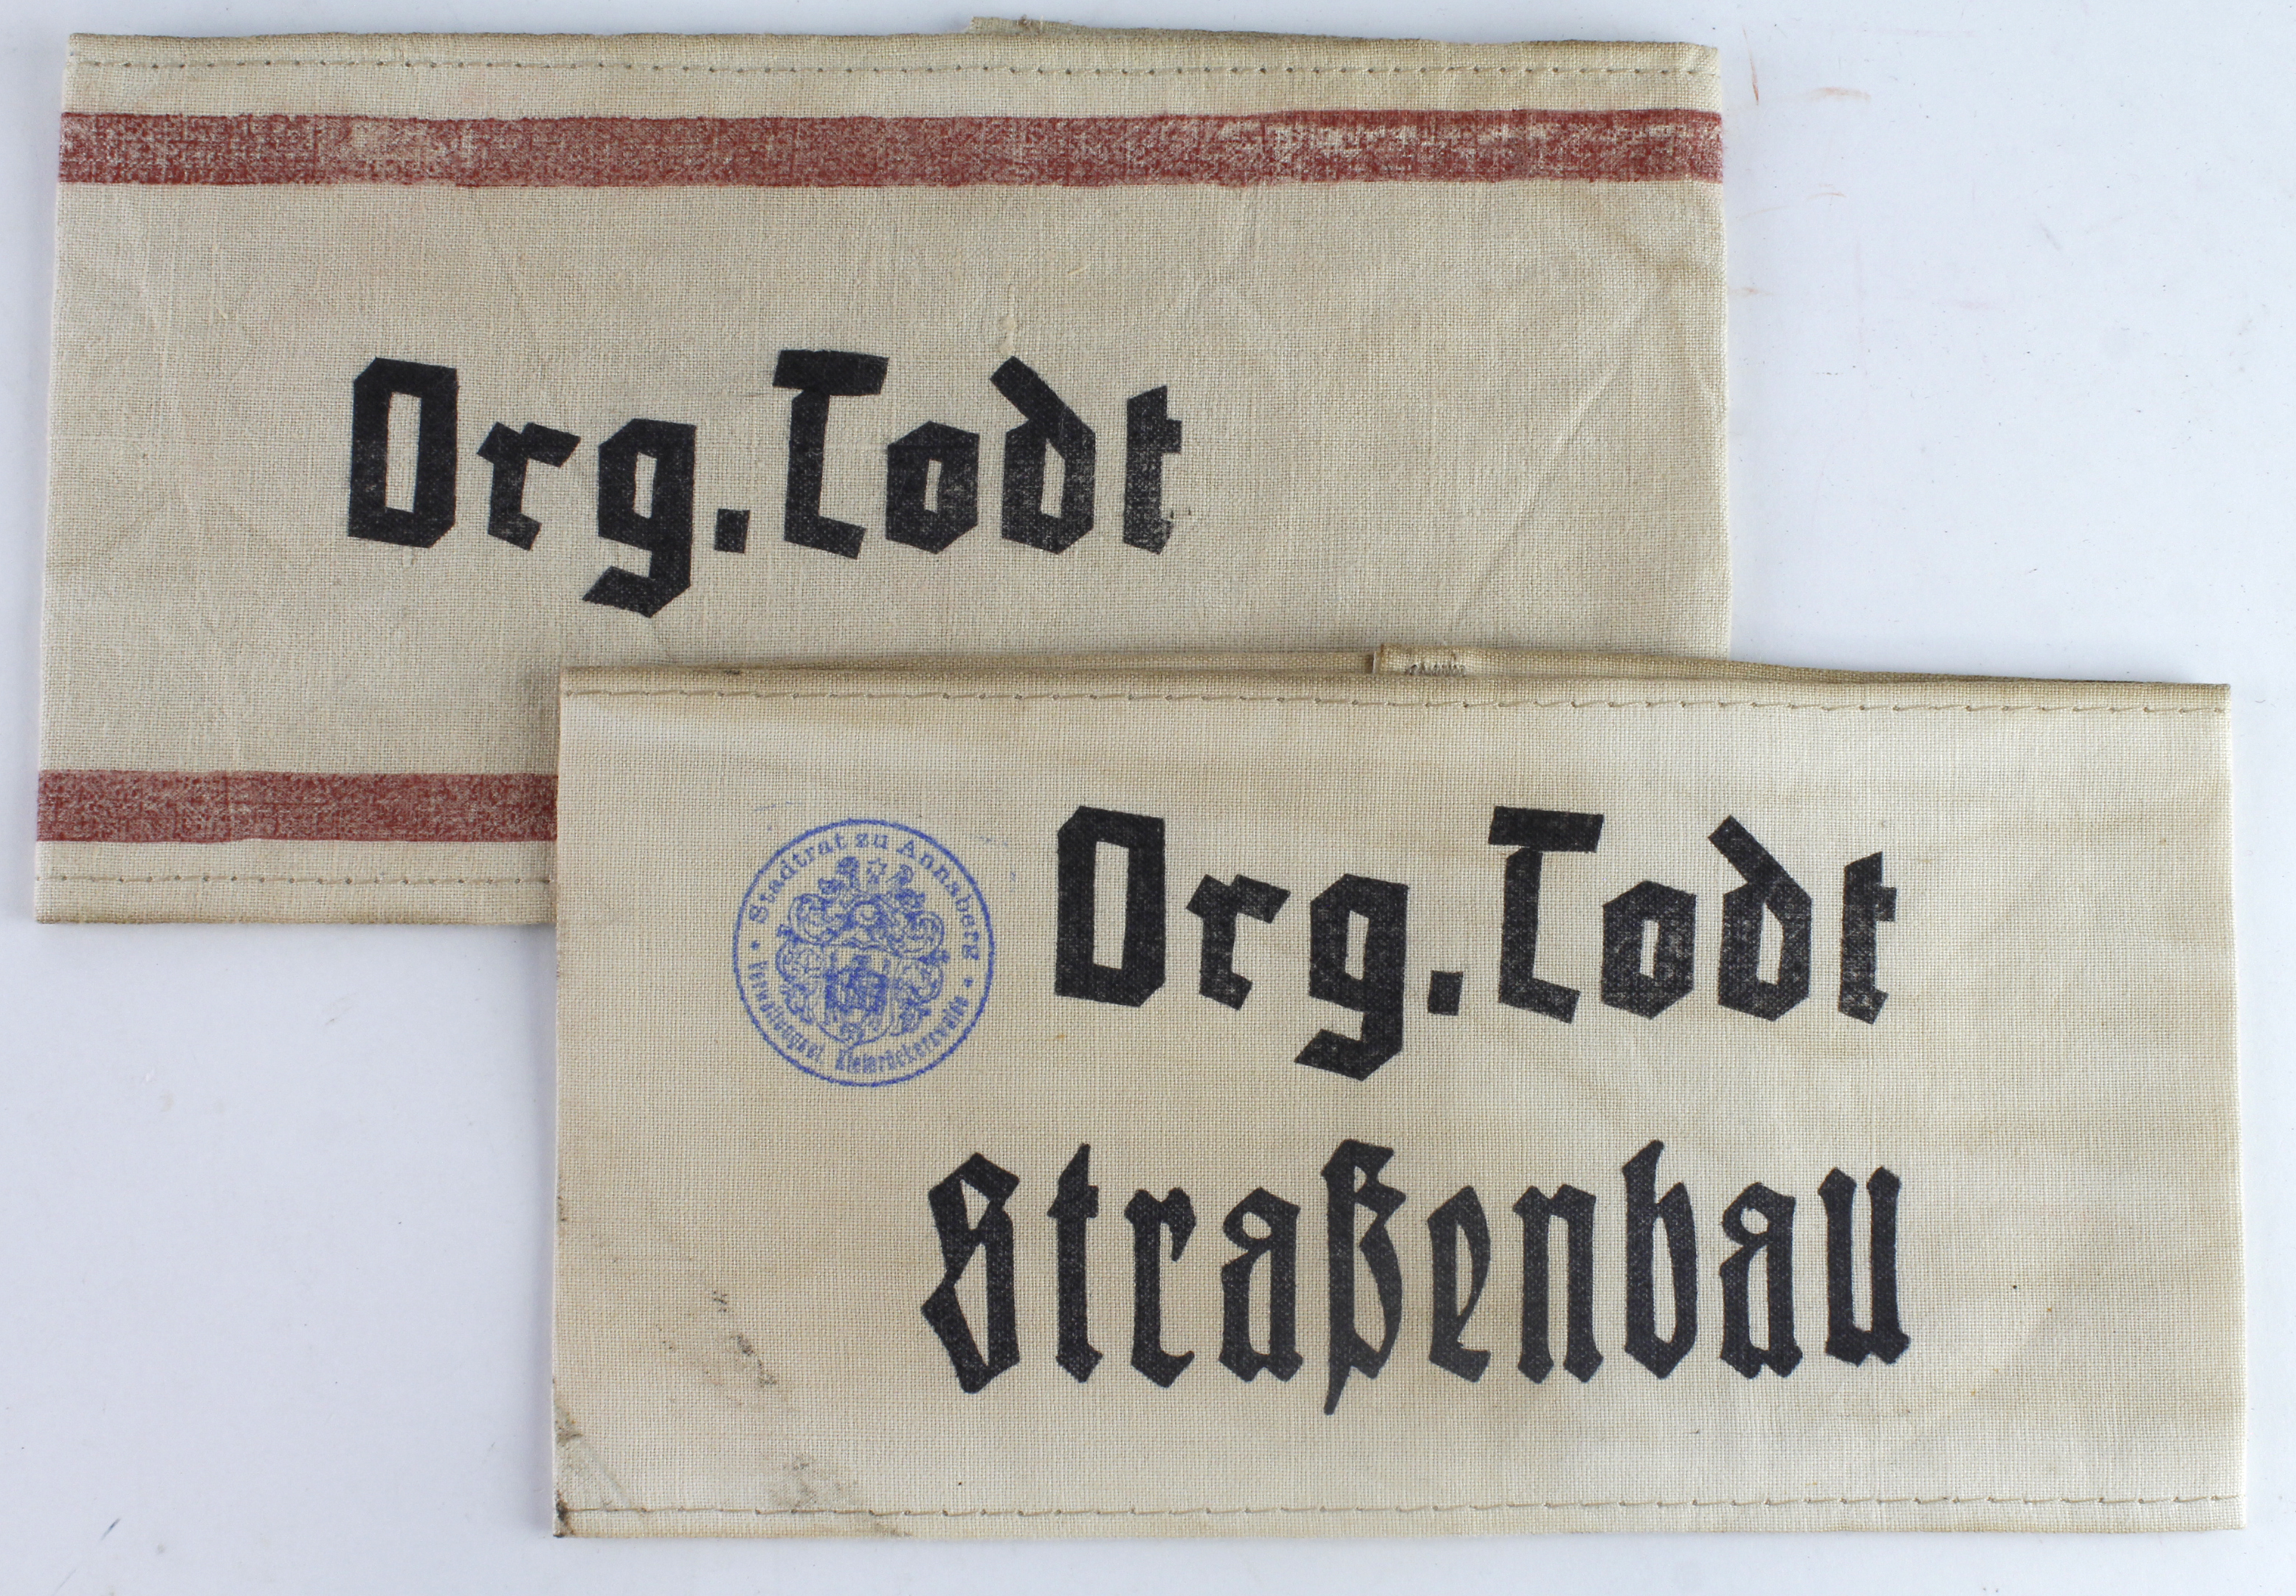 Germany from a one owner collection, two Org.Todt armbands.